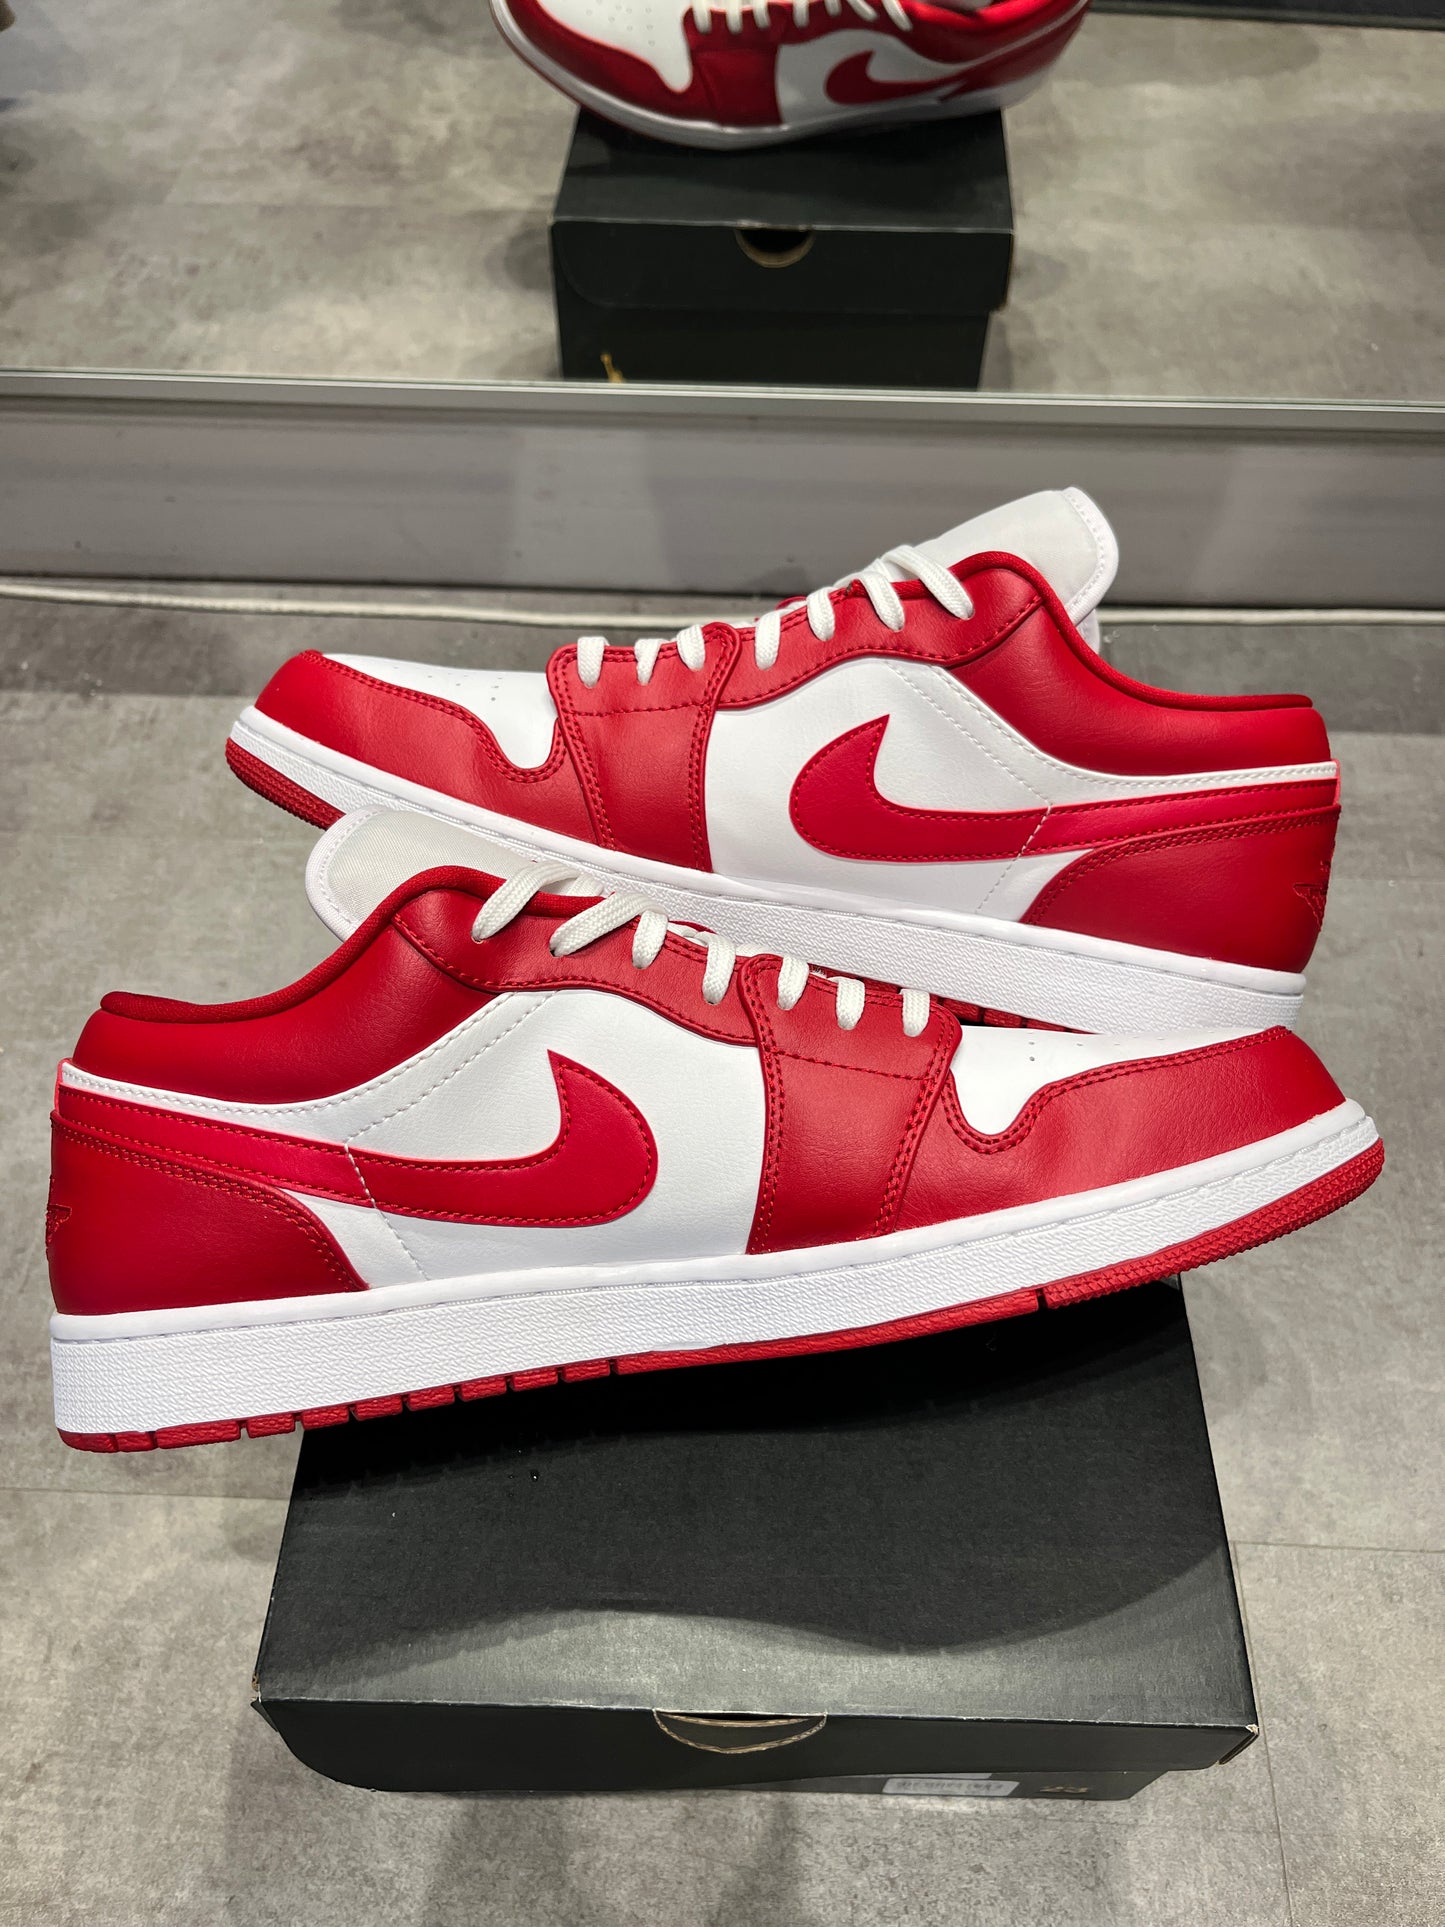 Jordan 1 Low Gym Red White (Preowned)